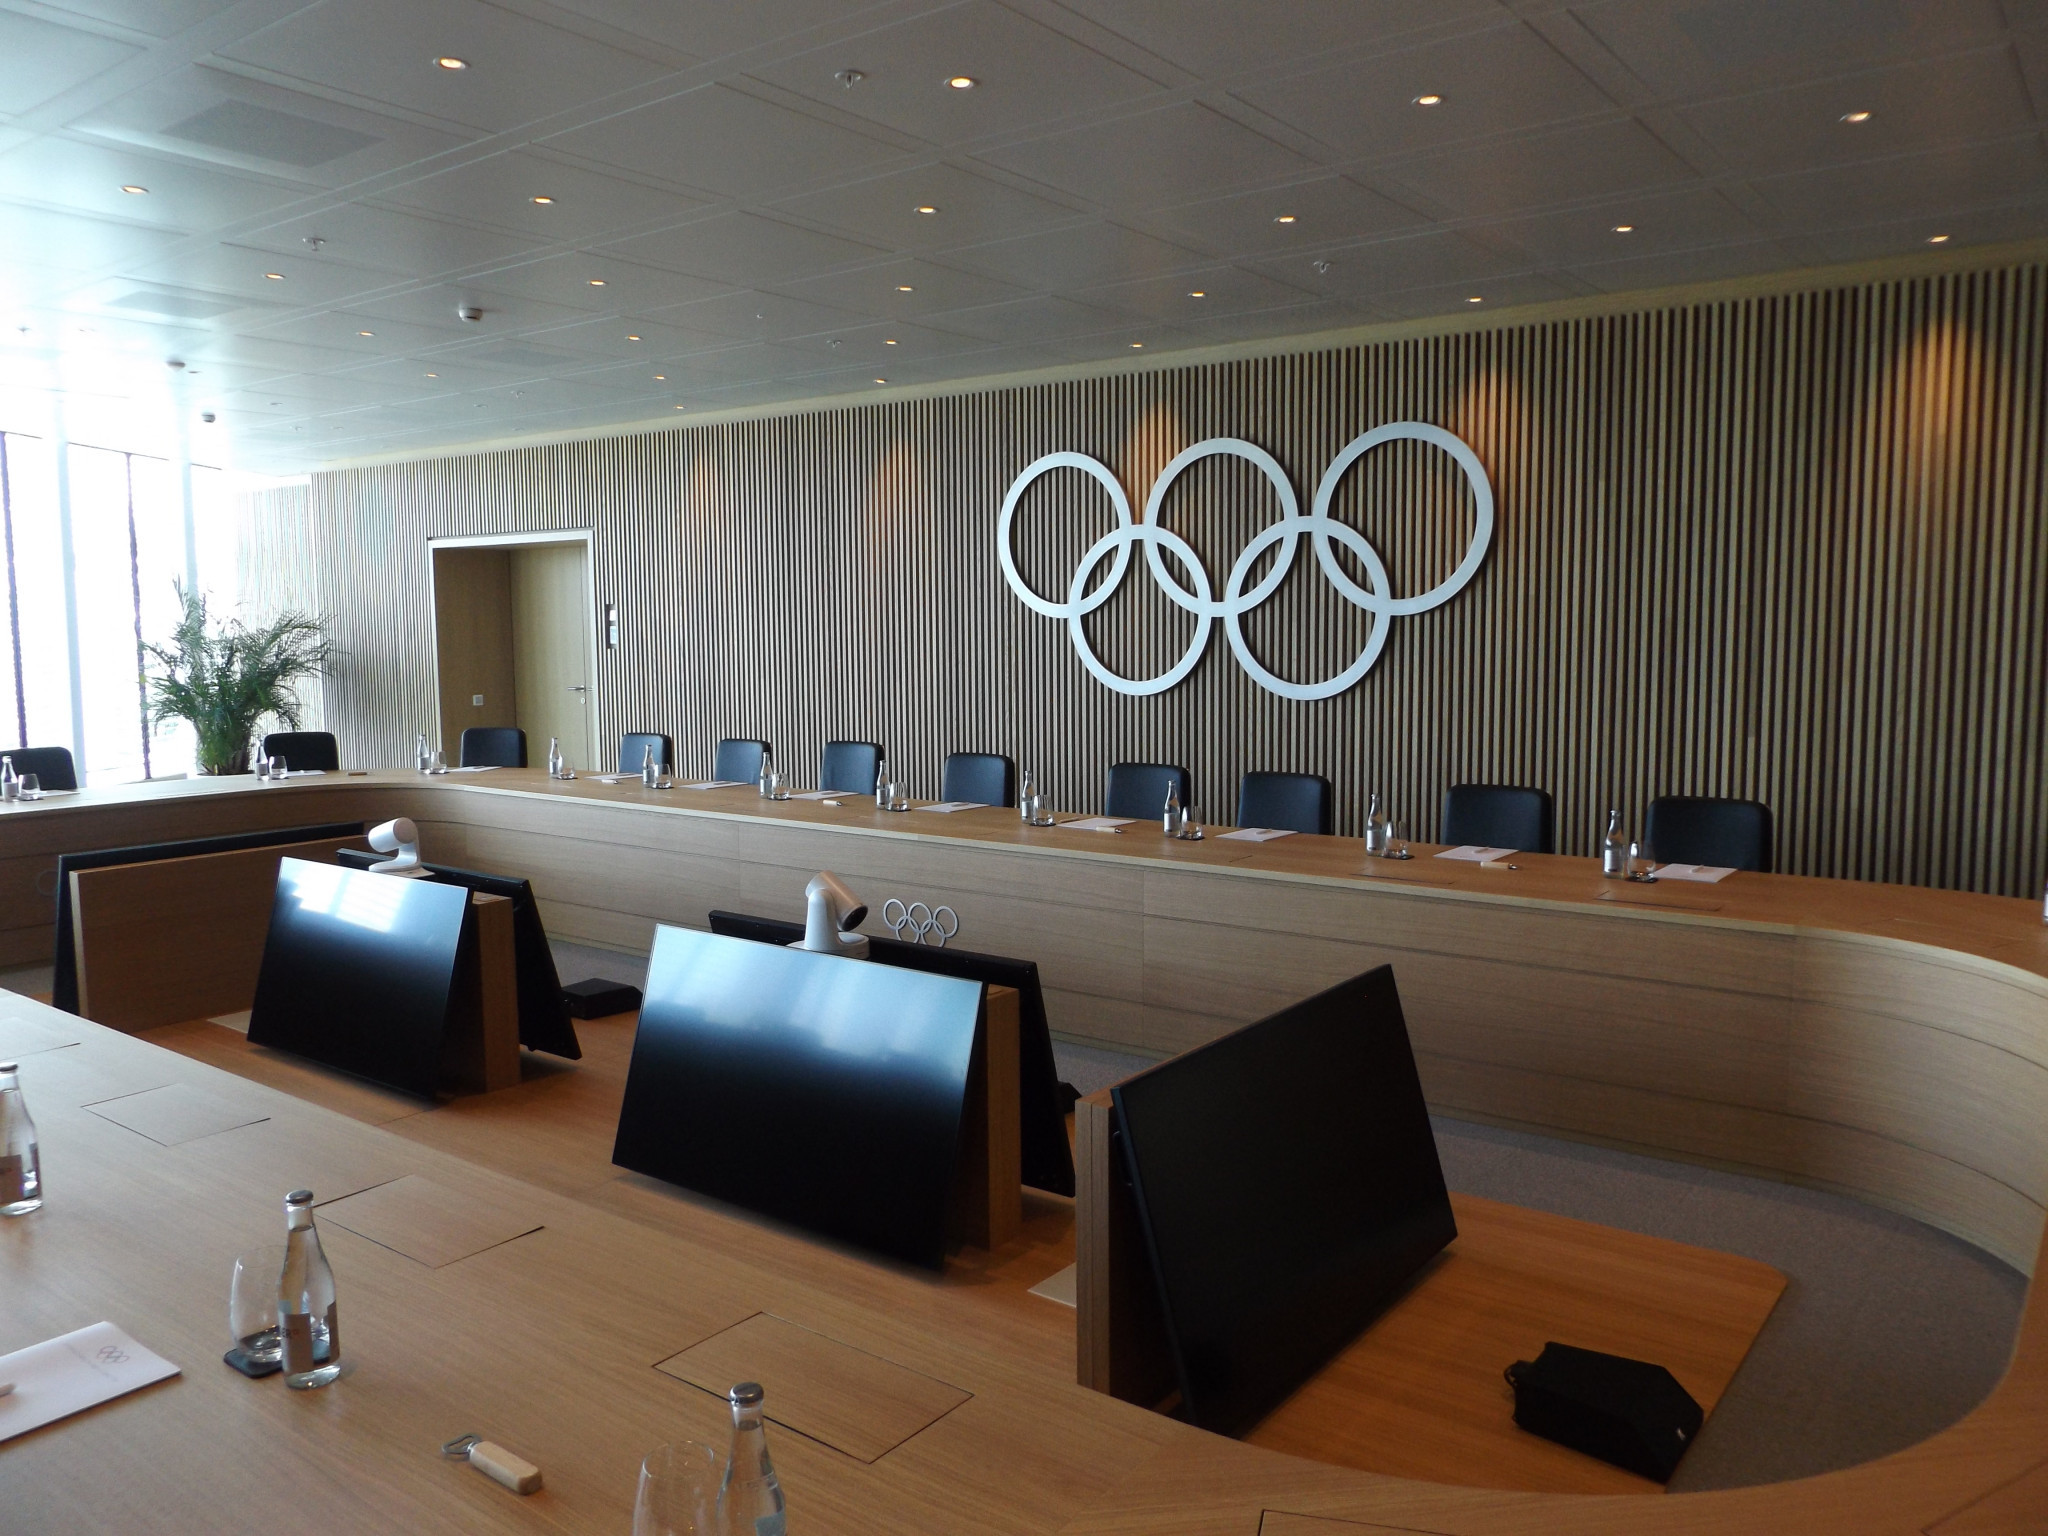 IOC Executive Board meetings, traditionally held in person, have moved to a virtual format this year owing to the coronavirus pandemic ©Philip Barker